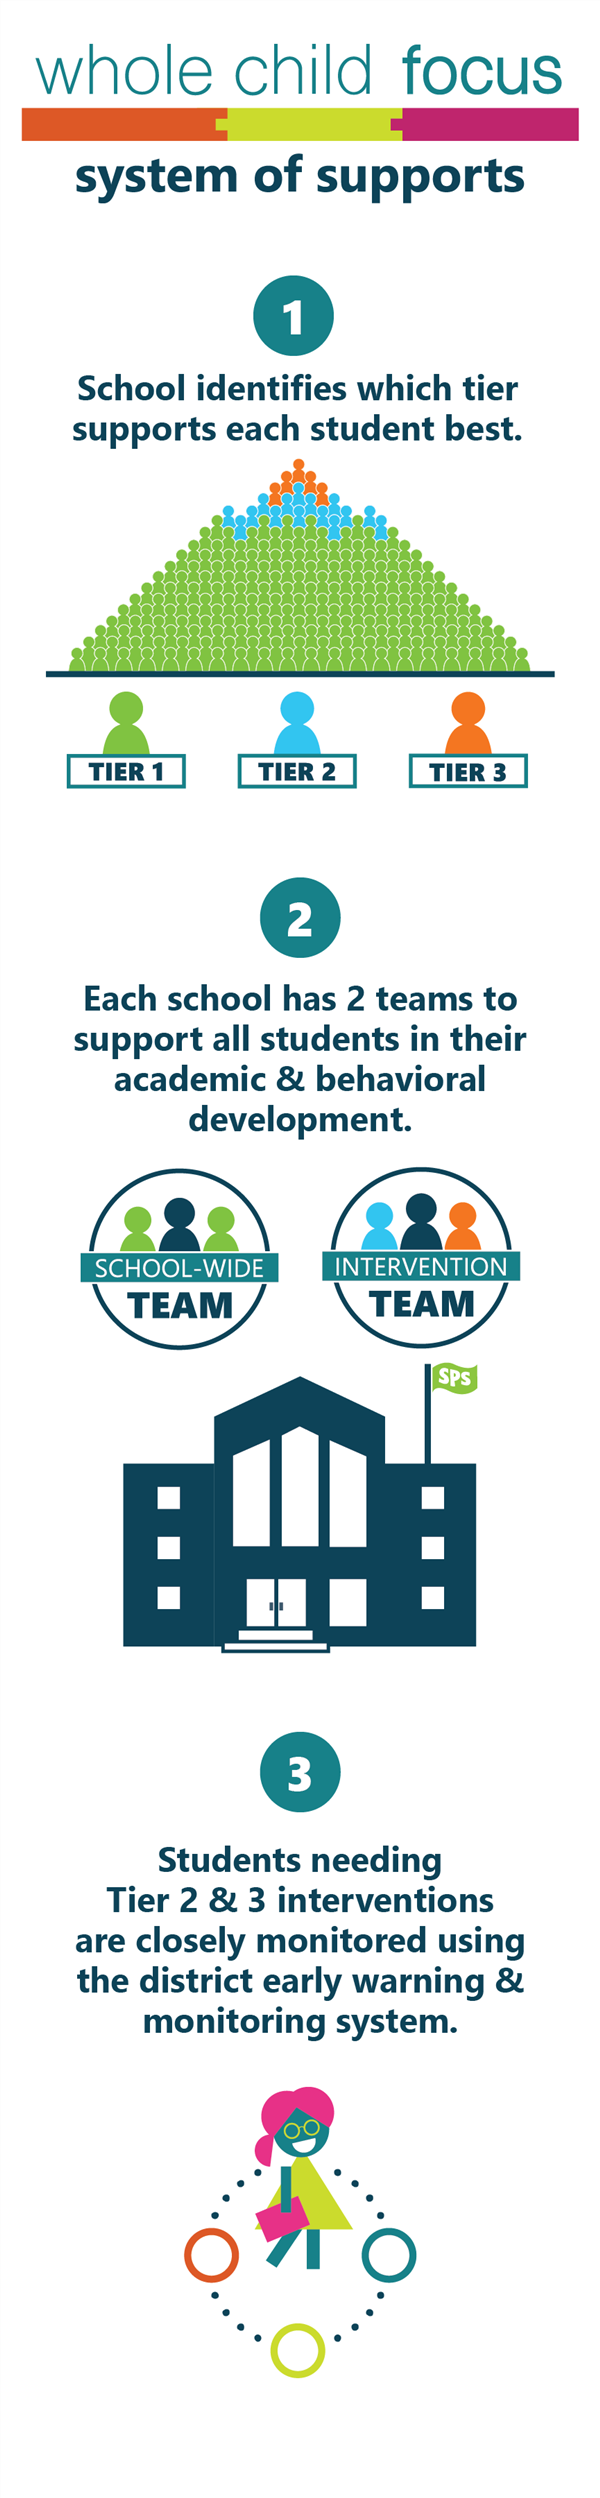 mtss logo and explanation of tiers of supports, found in the page text.